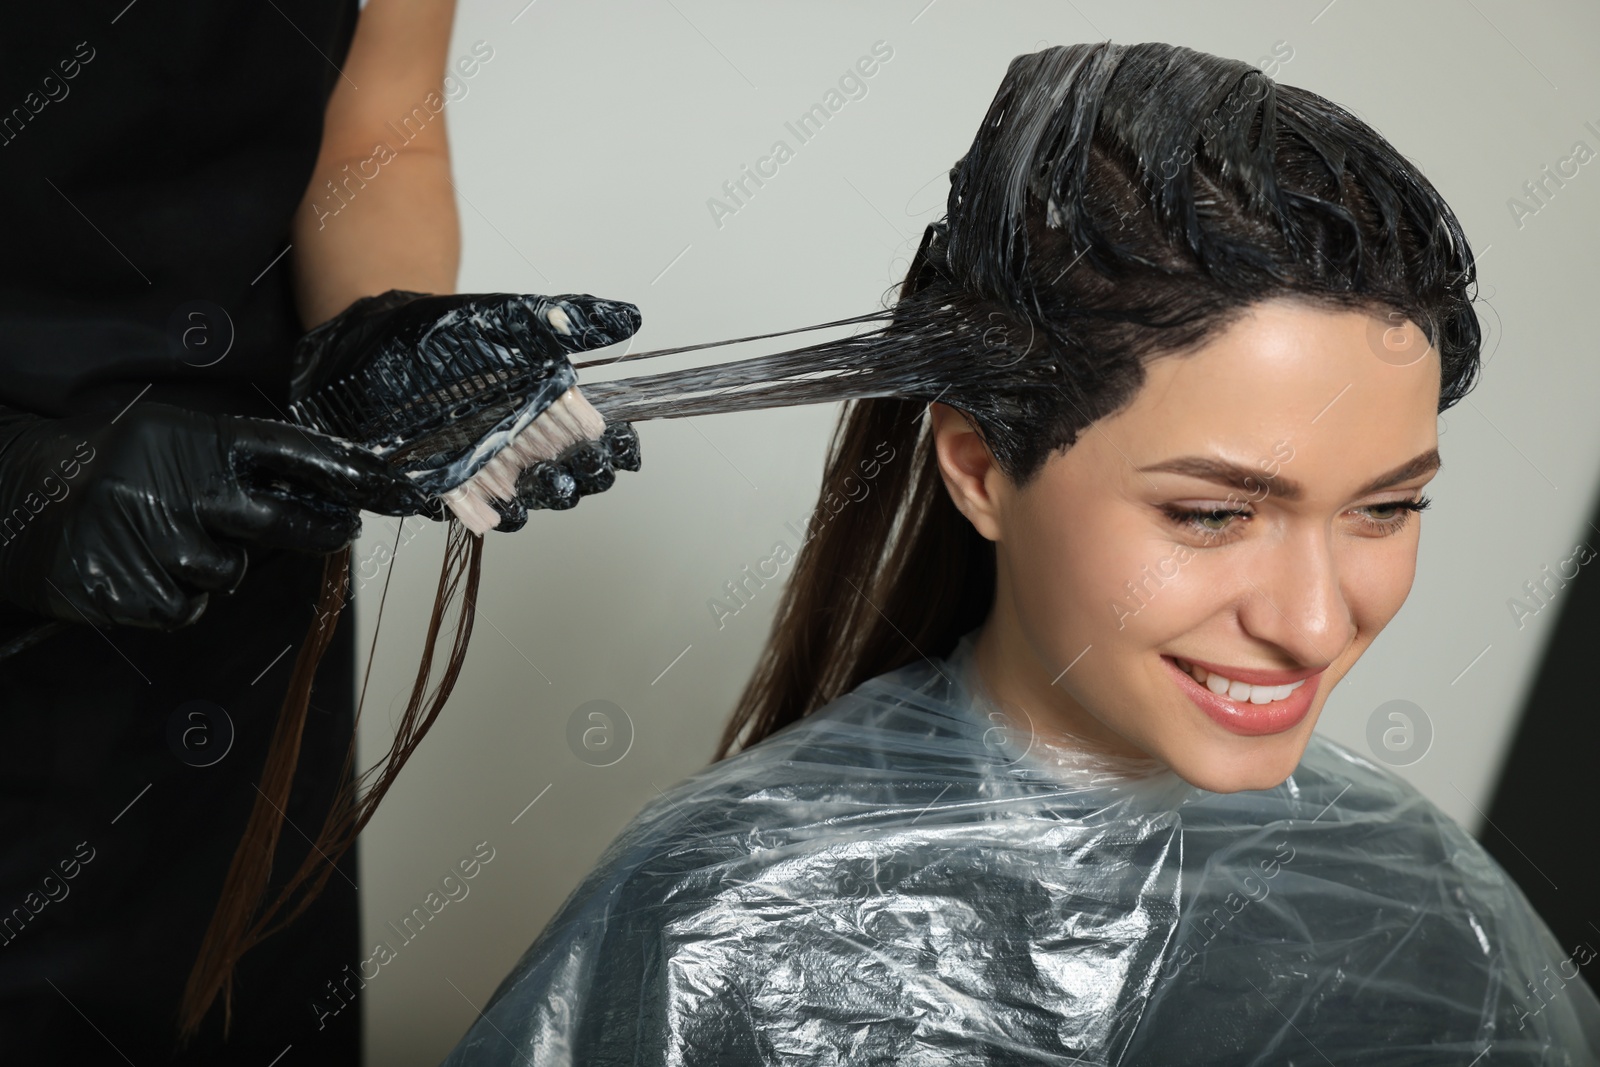 Photo of Professional hairdresser dyeing client's hair in beauty salon